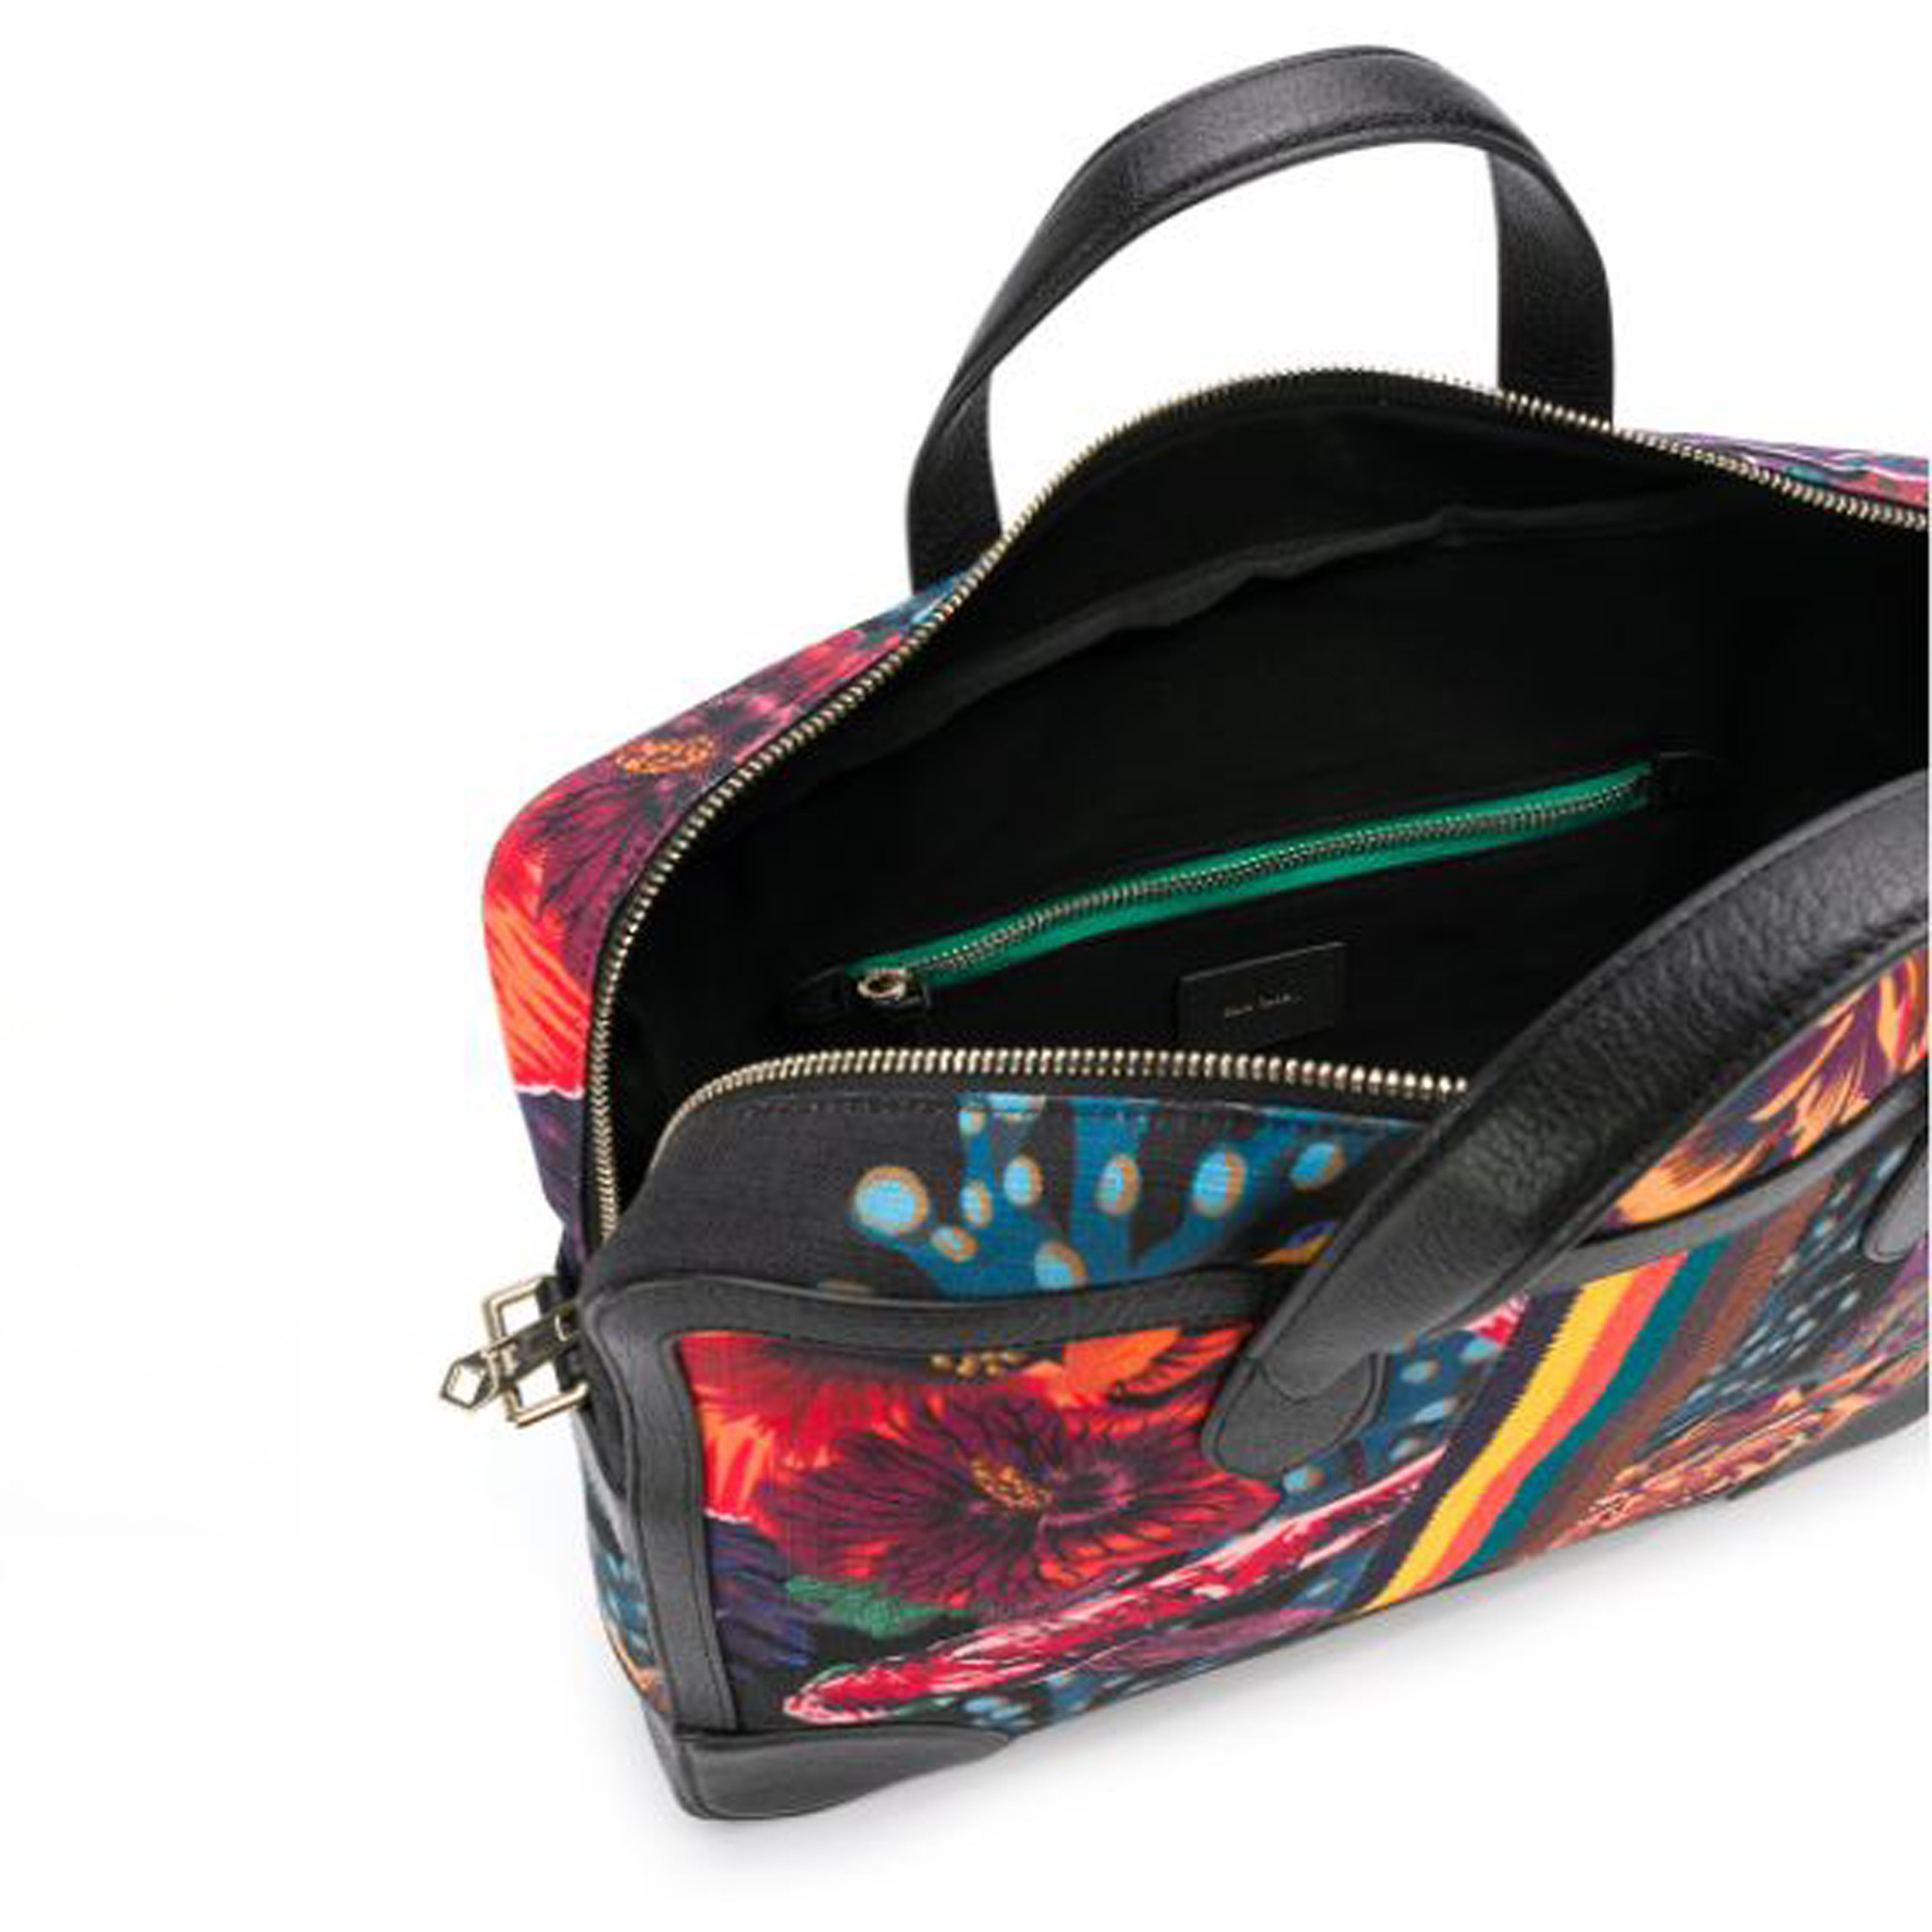 REVIEW: PAUL SMITH OCEAN AND FLORAL PRINT MICRO-RIPSTOP MESSENGER